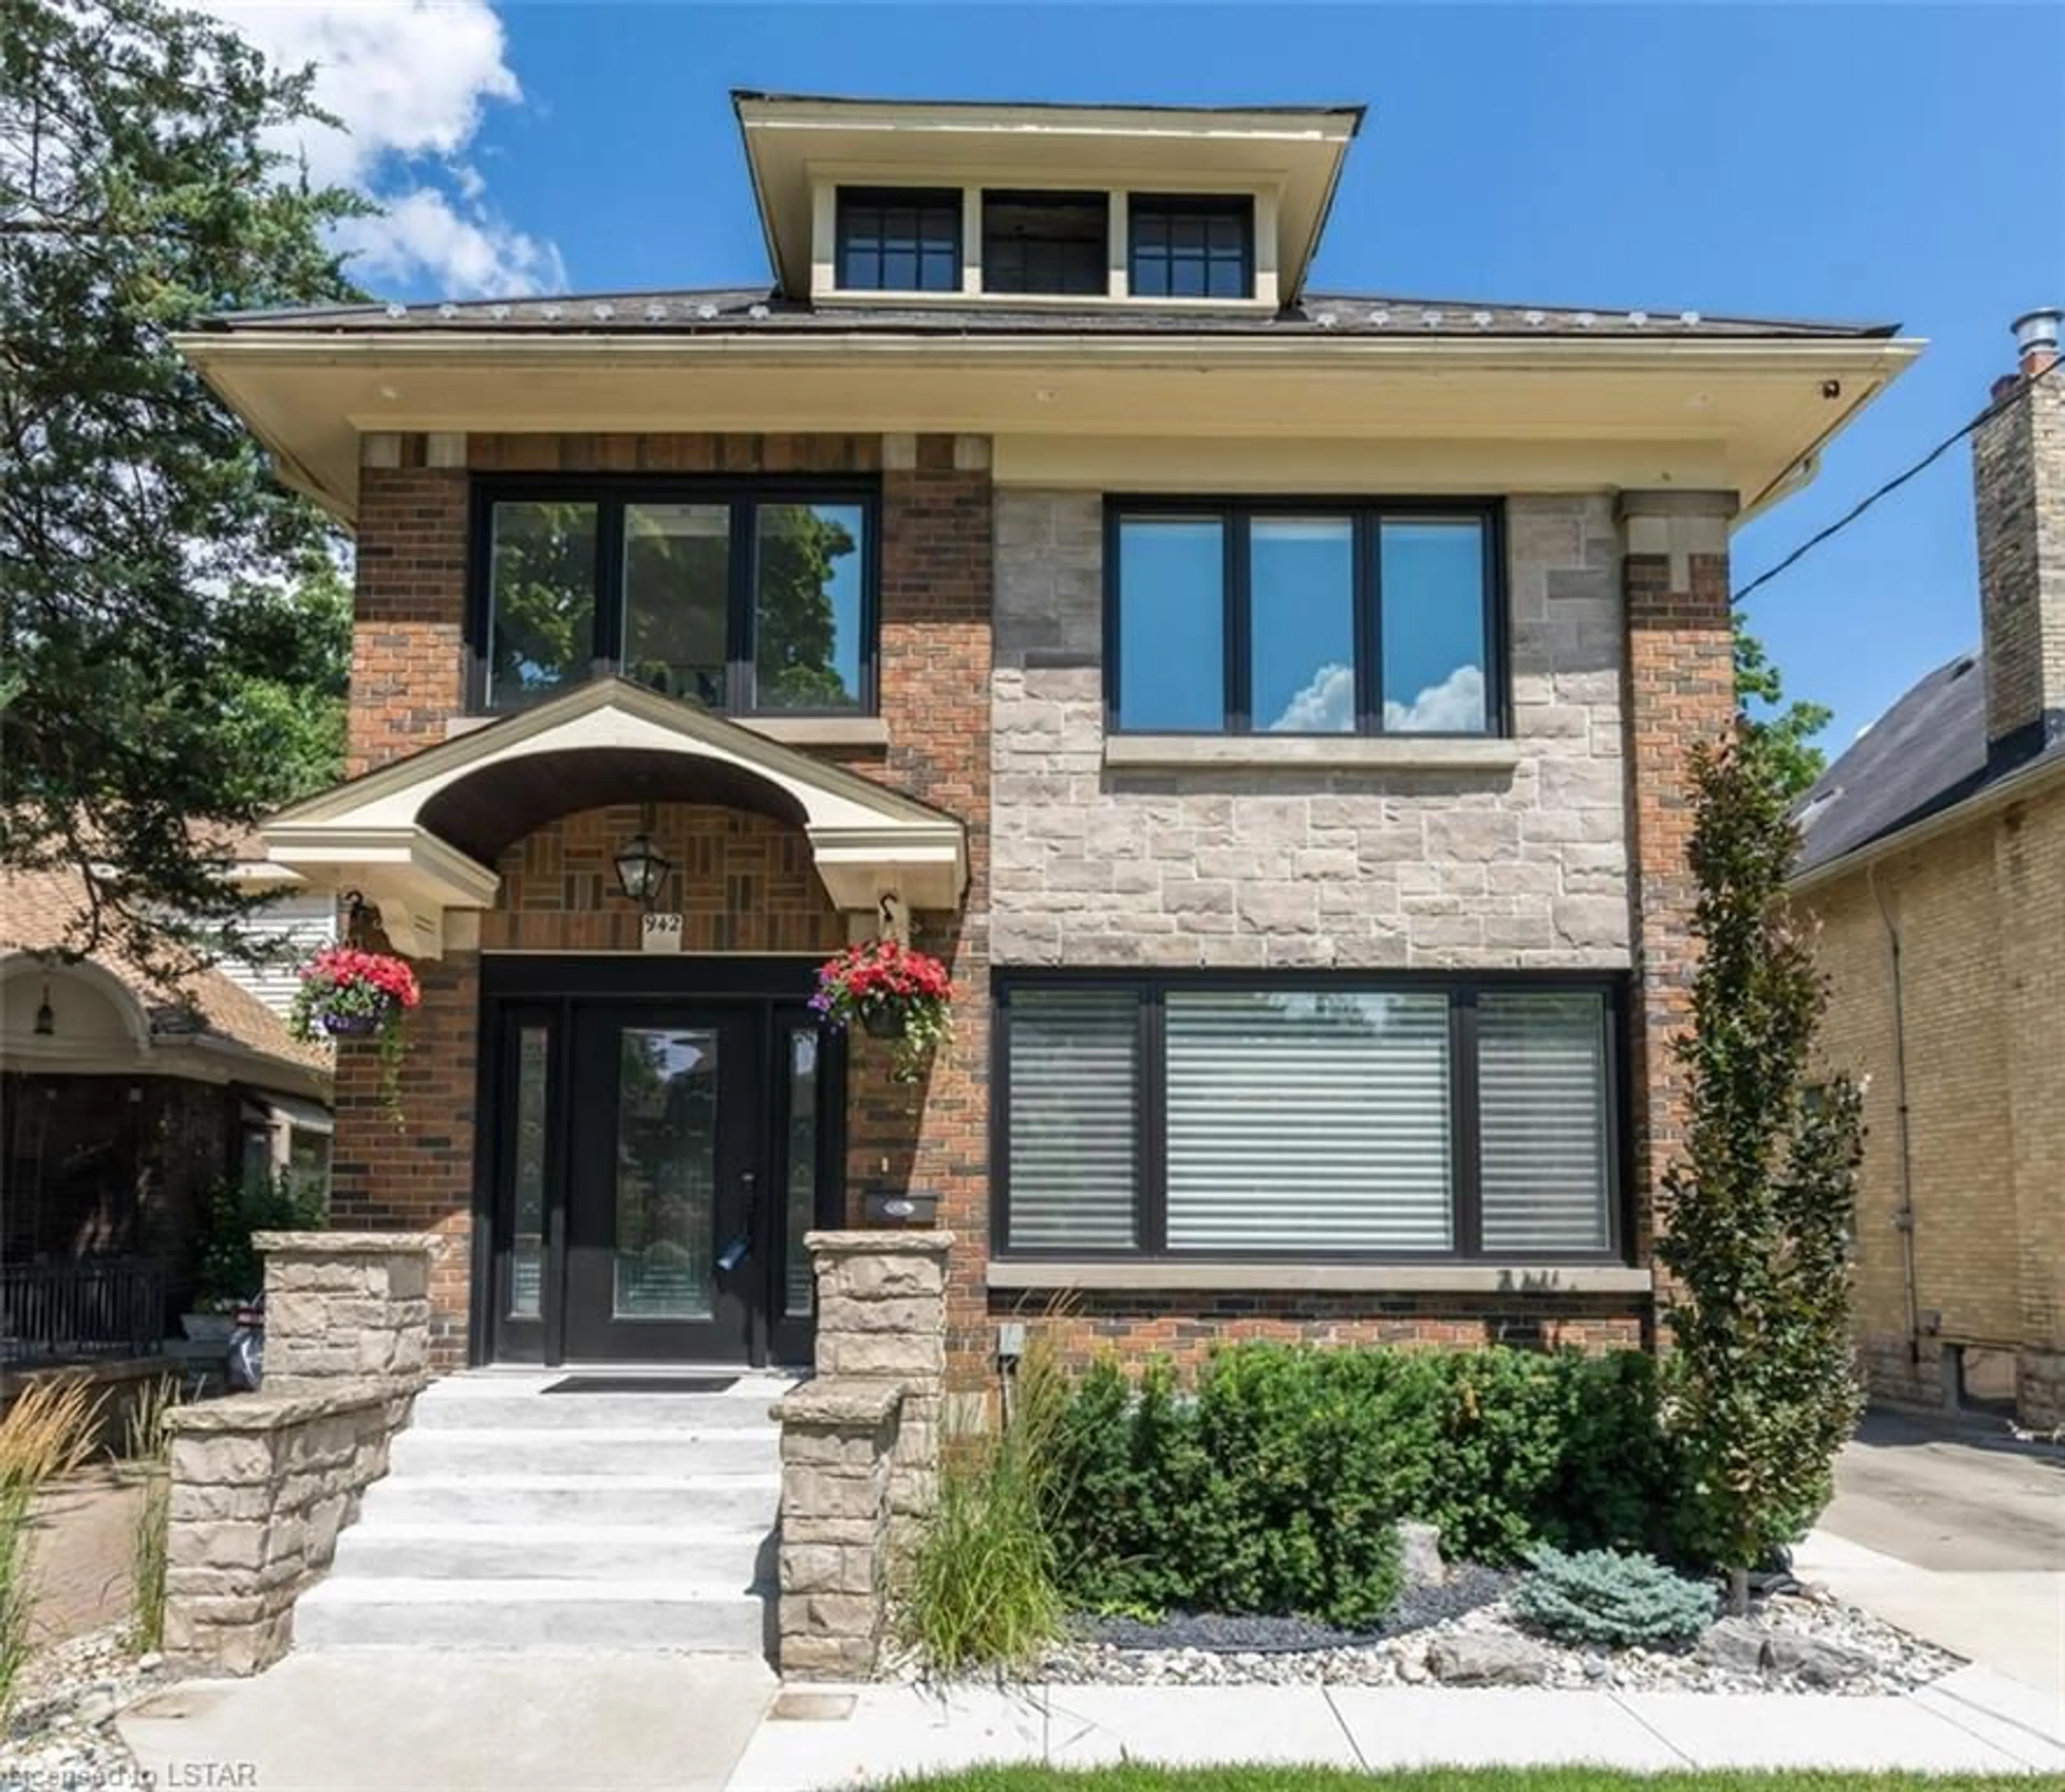 Home with brick exterior material for 942 Wellington St, London Ontario N6A 3S9